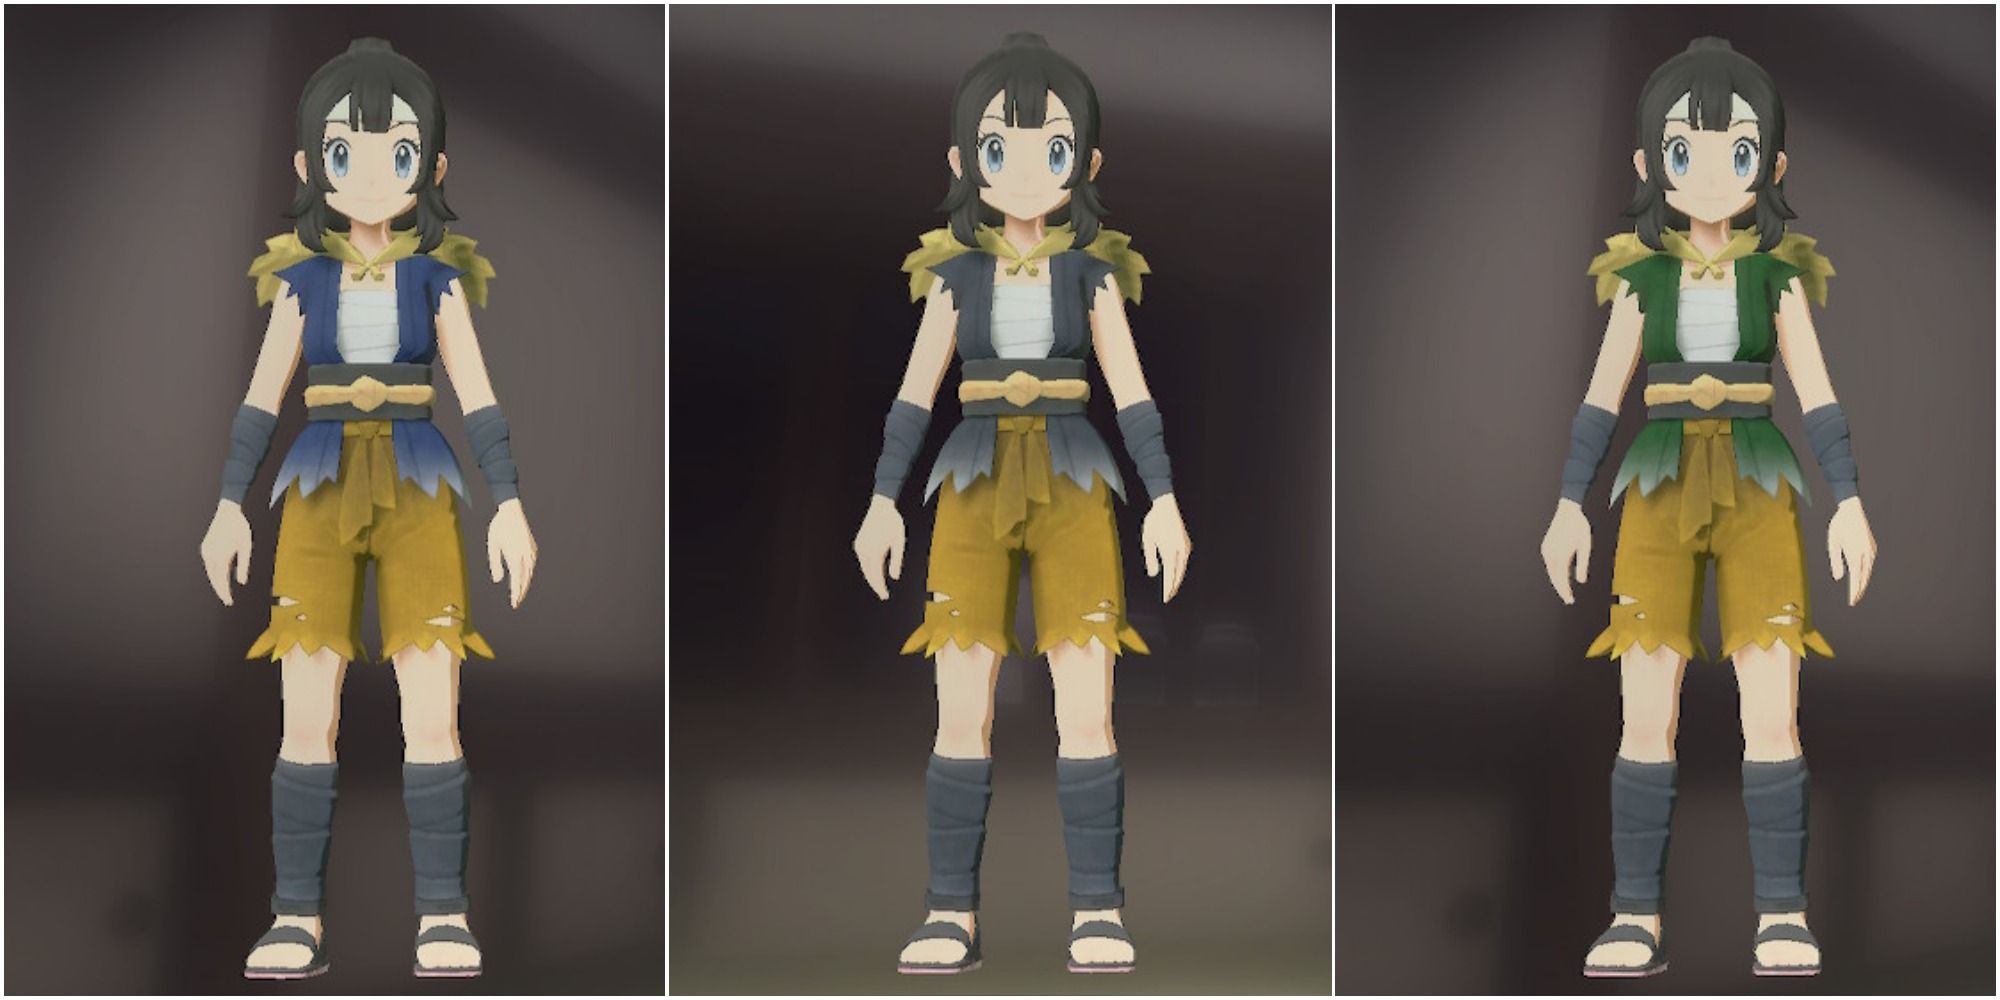 Three split images of the Pokemon Legends Arceus girl trainer wearing the Indigo Bandit Outfit, Dark Slate Bandit Outfit and Pine Bandit Outfit.